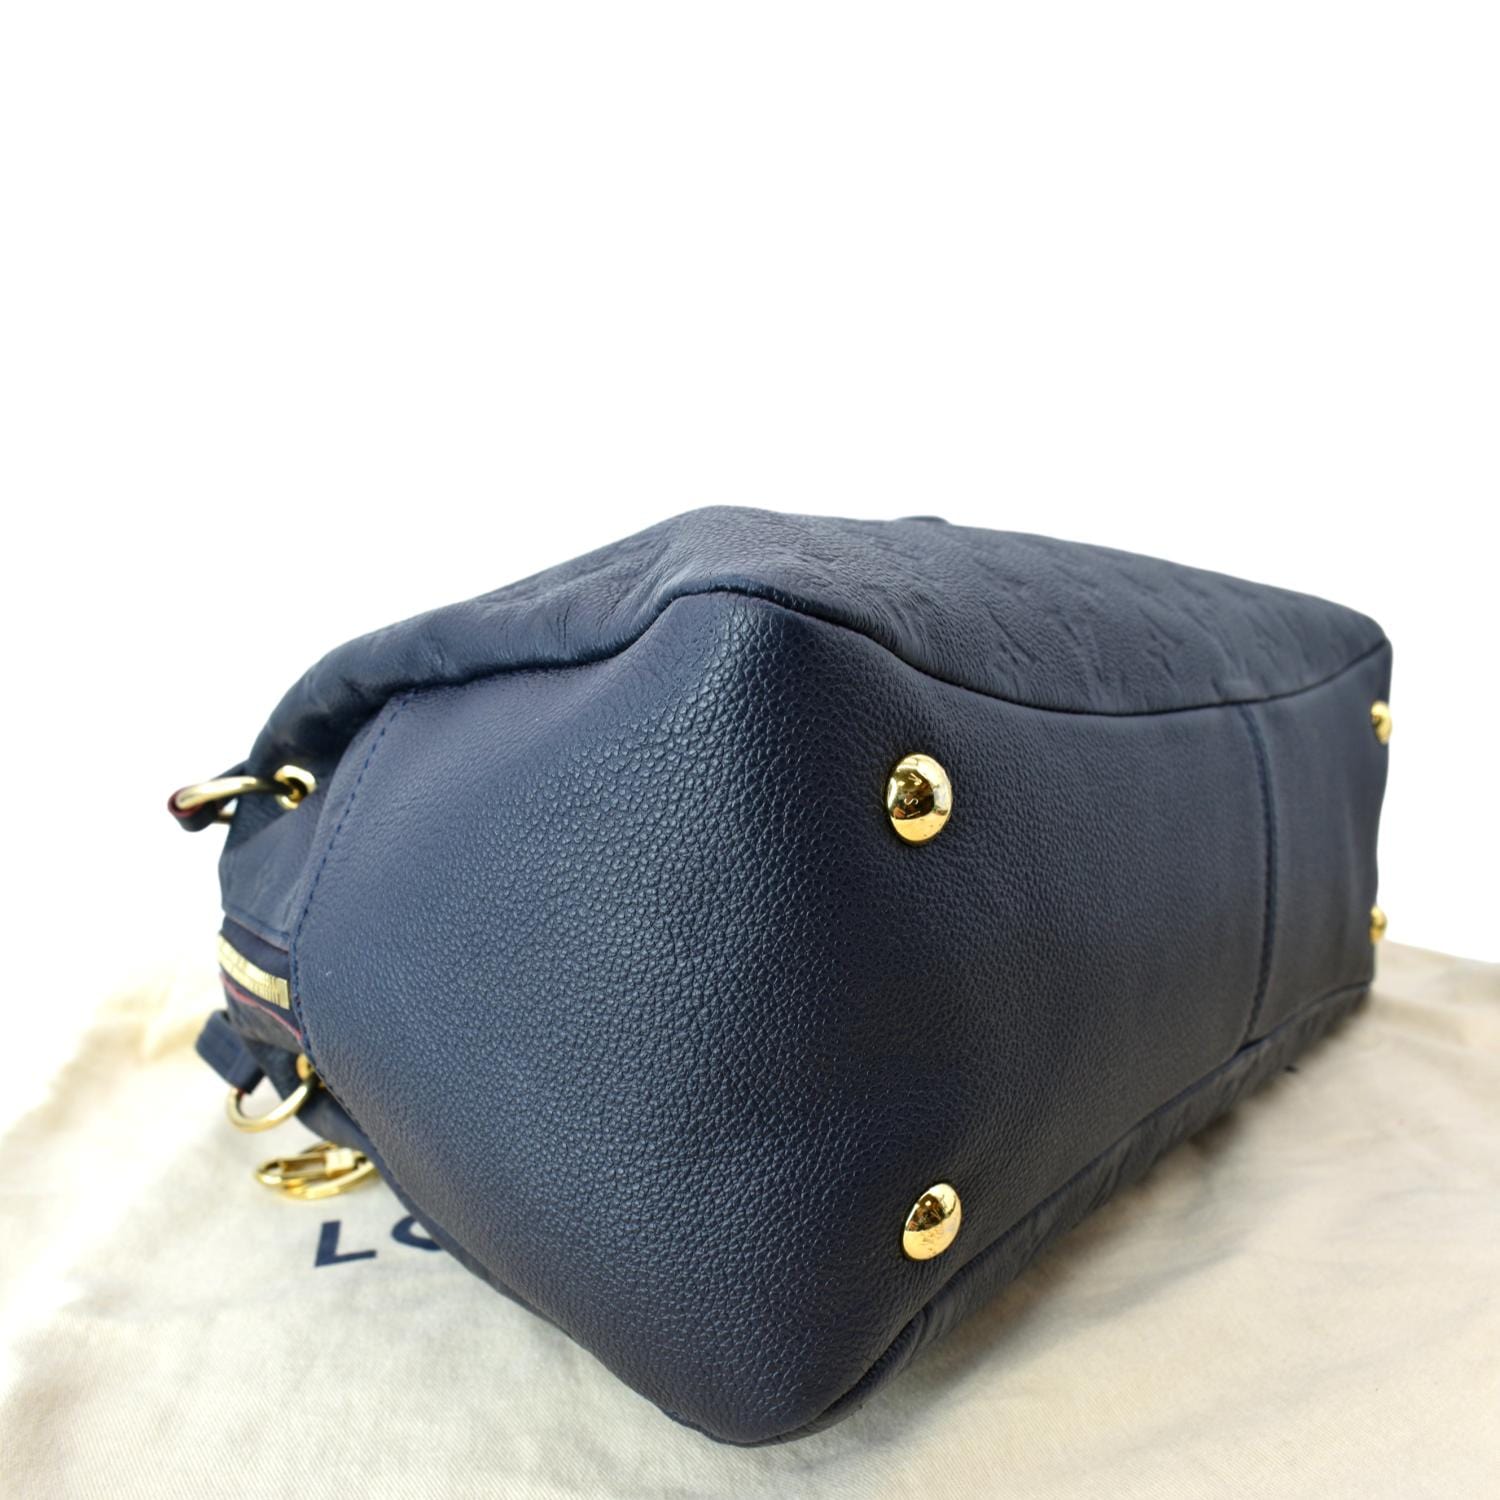 💙LOUIS VUITTON PONT-NEUF EMPREINTE BLUE💙 Excellent to almost new! Made in  Spain on 15th week of 2016 - datecode CA1156. Comes with dustbag,  clochette, 2